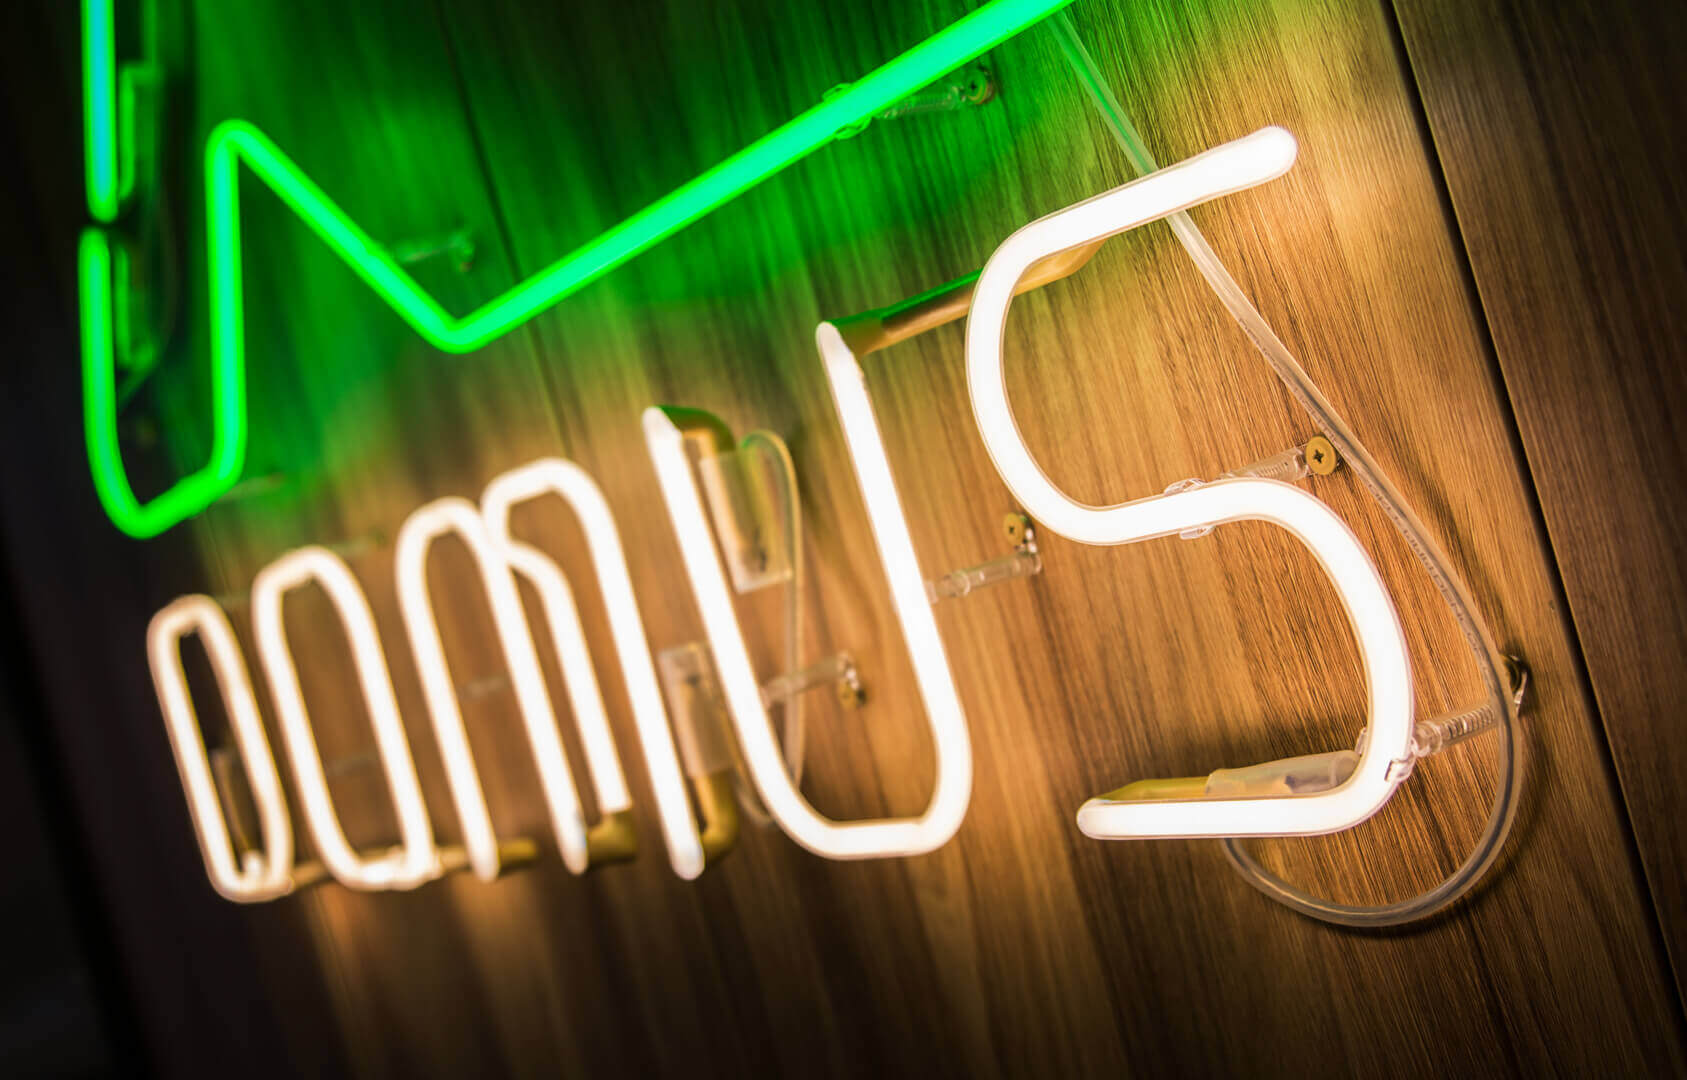 Domus - neon-domus-neon-sublighted-neon-on-a-wooden-wall-neon-interior-neon-in-office-neon-on-order-architects-silver-green-color-white-neon-mounted-to-the-wall-neon-lettering